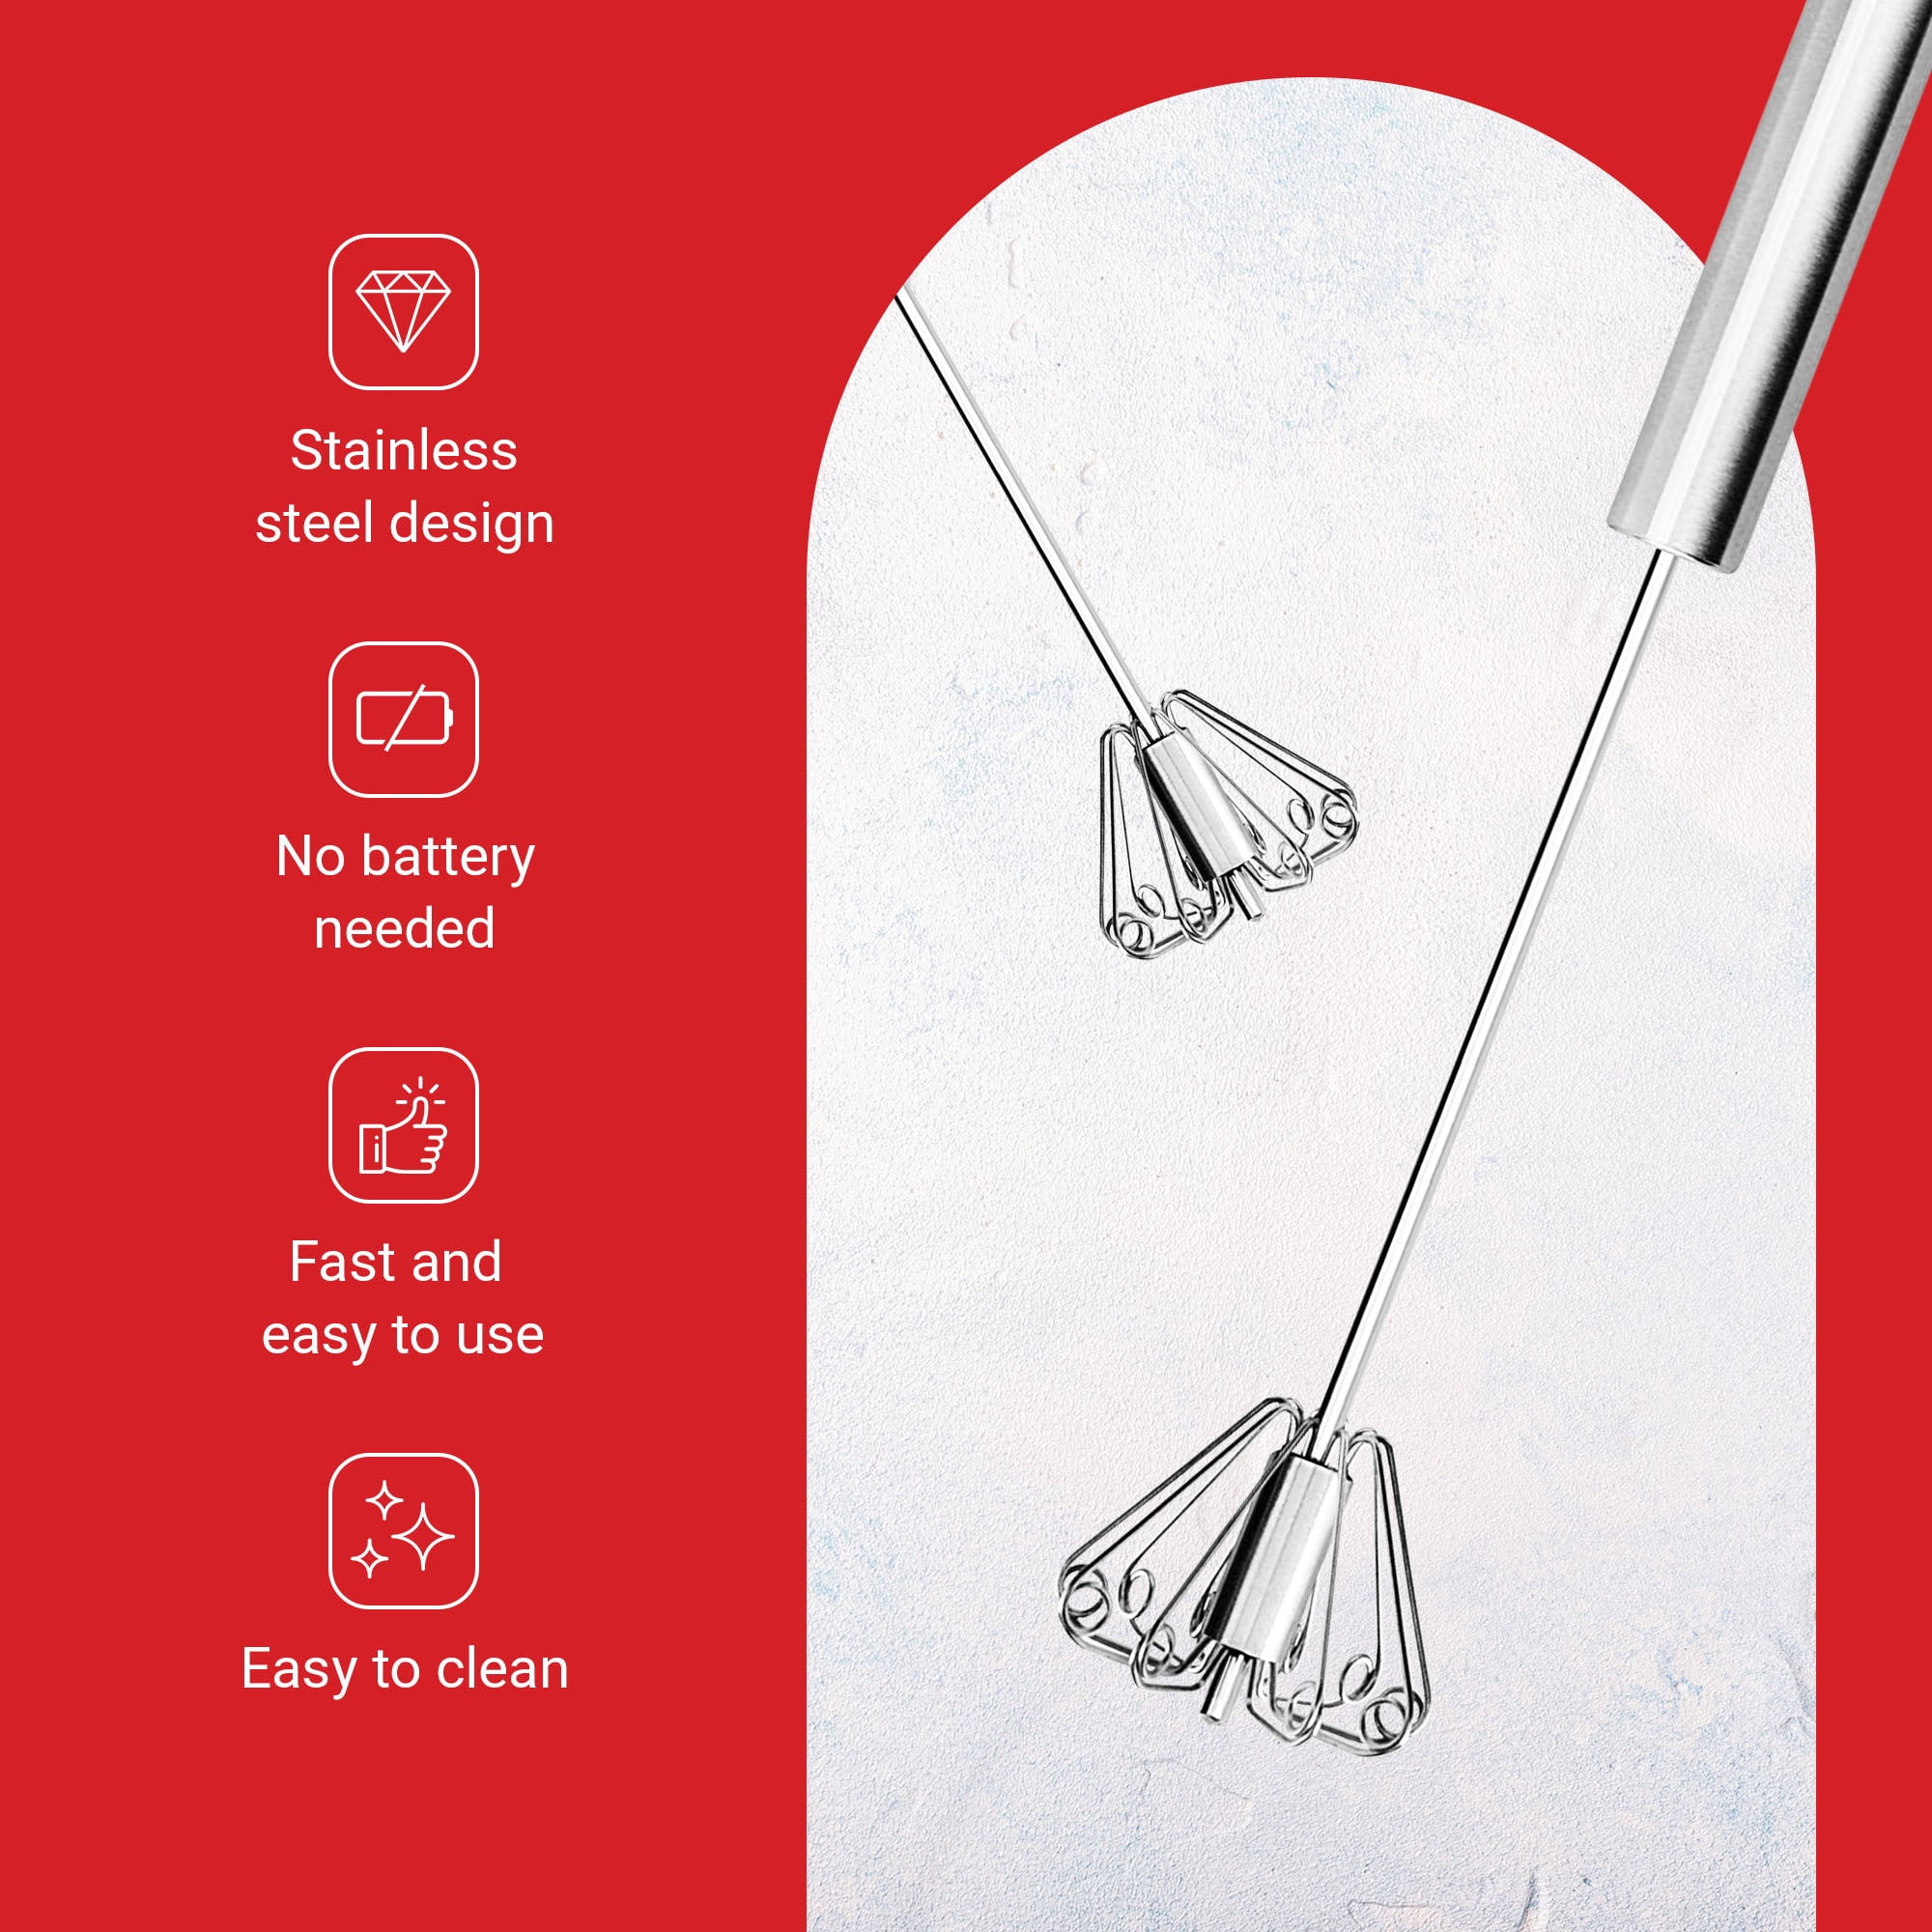 This Simple Tool Is the Fastest Way to Wash Your Whisks